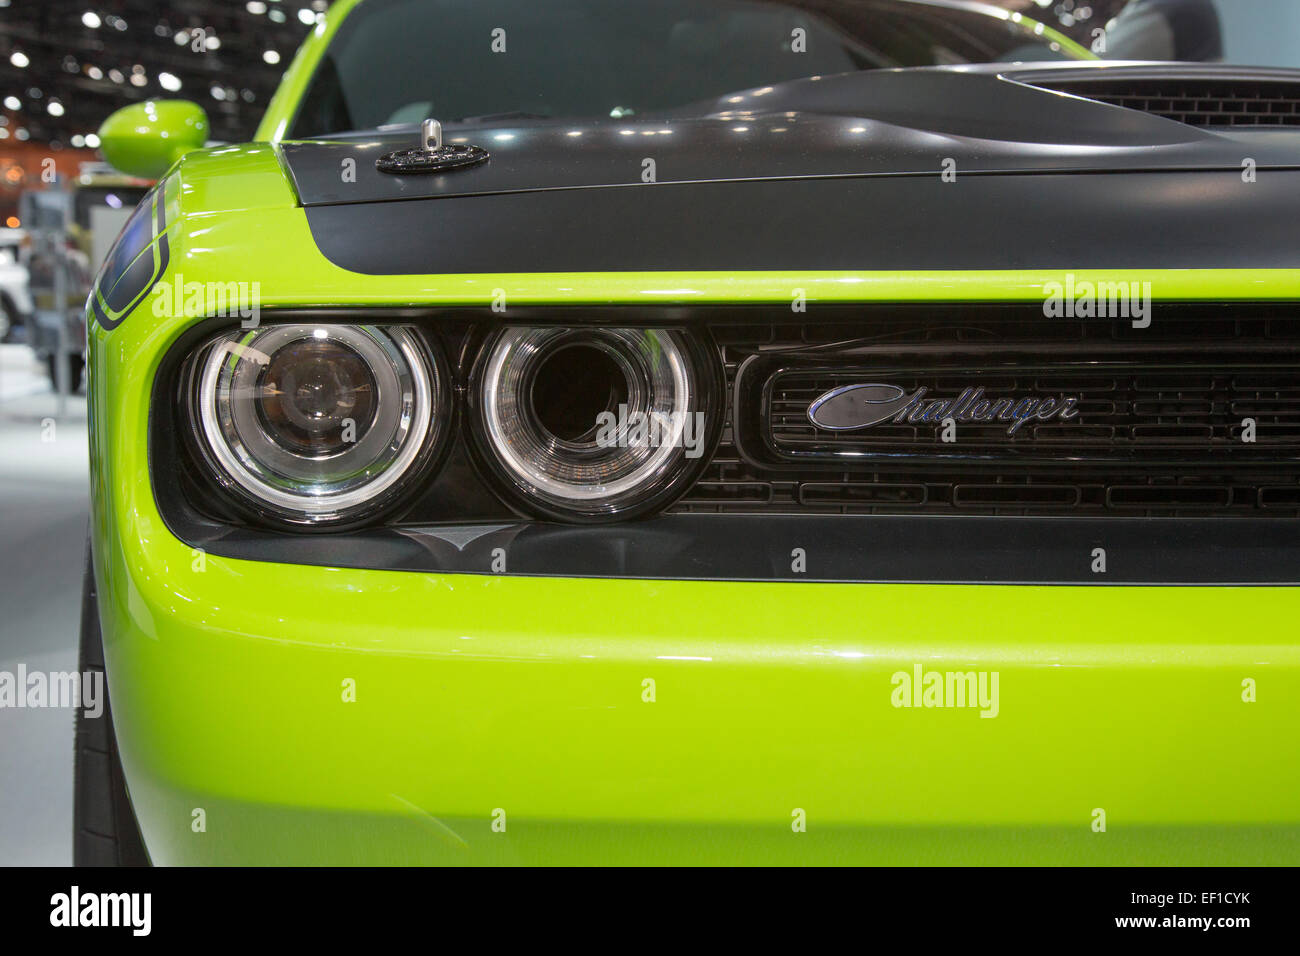 Detroit, Michigan - The Dodge Challenger T/A concept car on display at the North American International Auto Show. Stock Photo